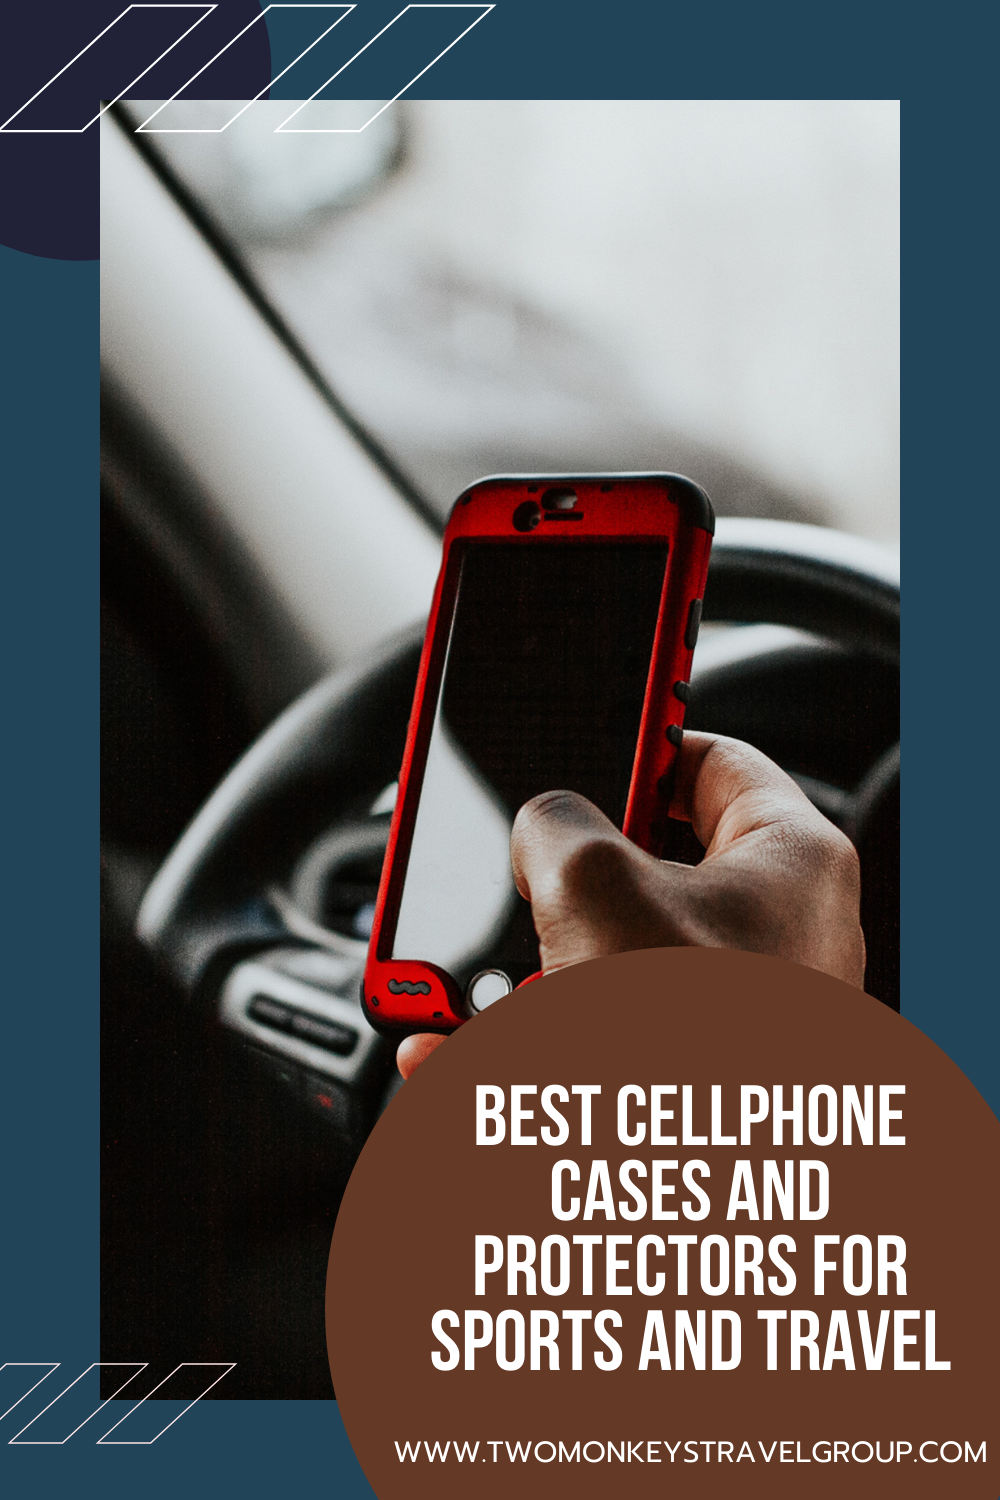 Best Cellphone Cases and Protectors for Sports and Travel